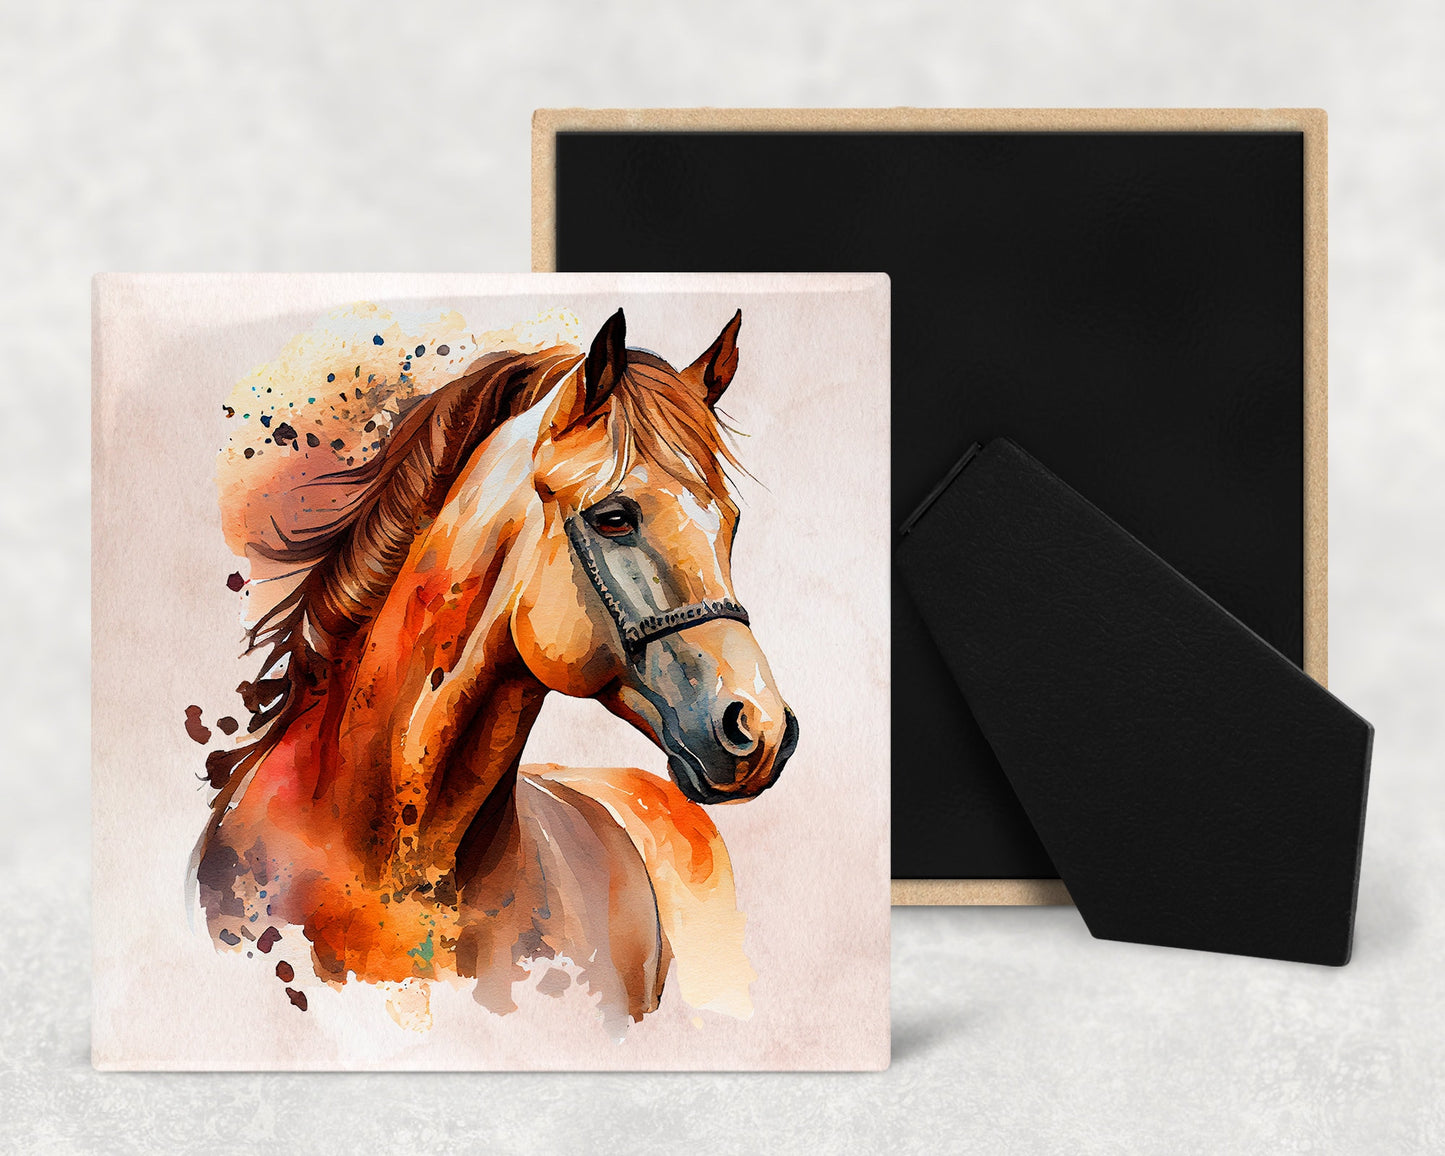 Watercolor Horse Art Decorative Ceramic Tile with Optional Easel Back - Available in 3 Sizes